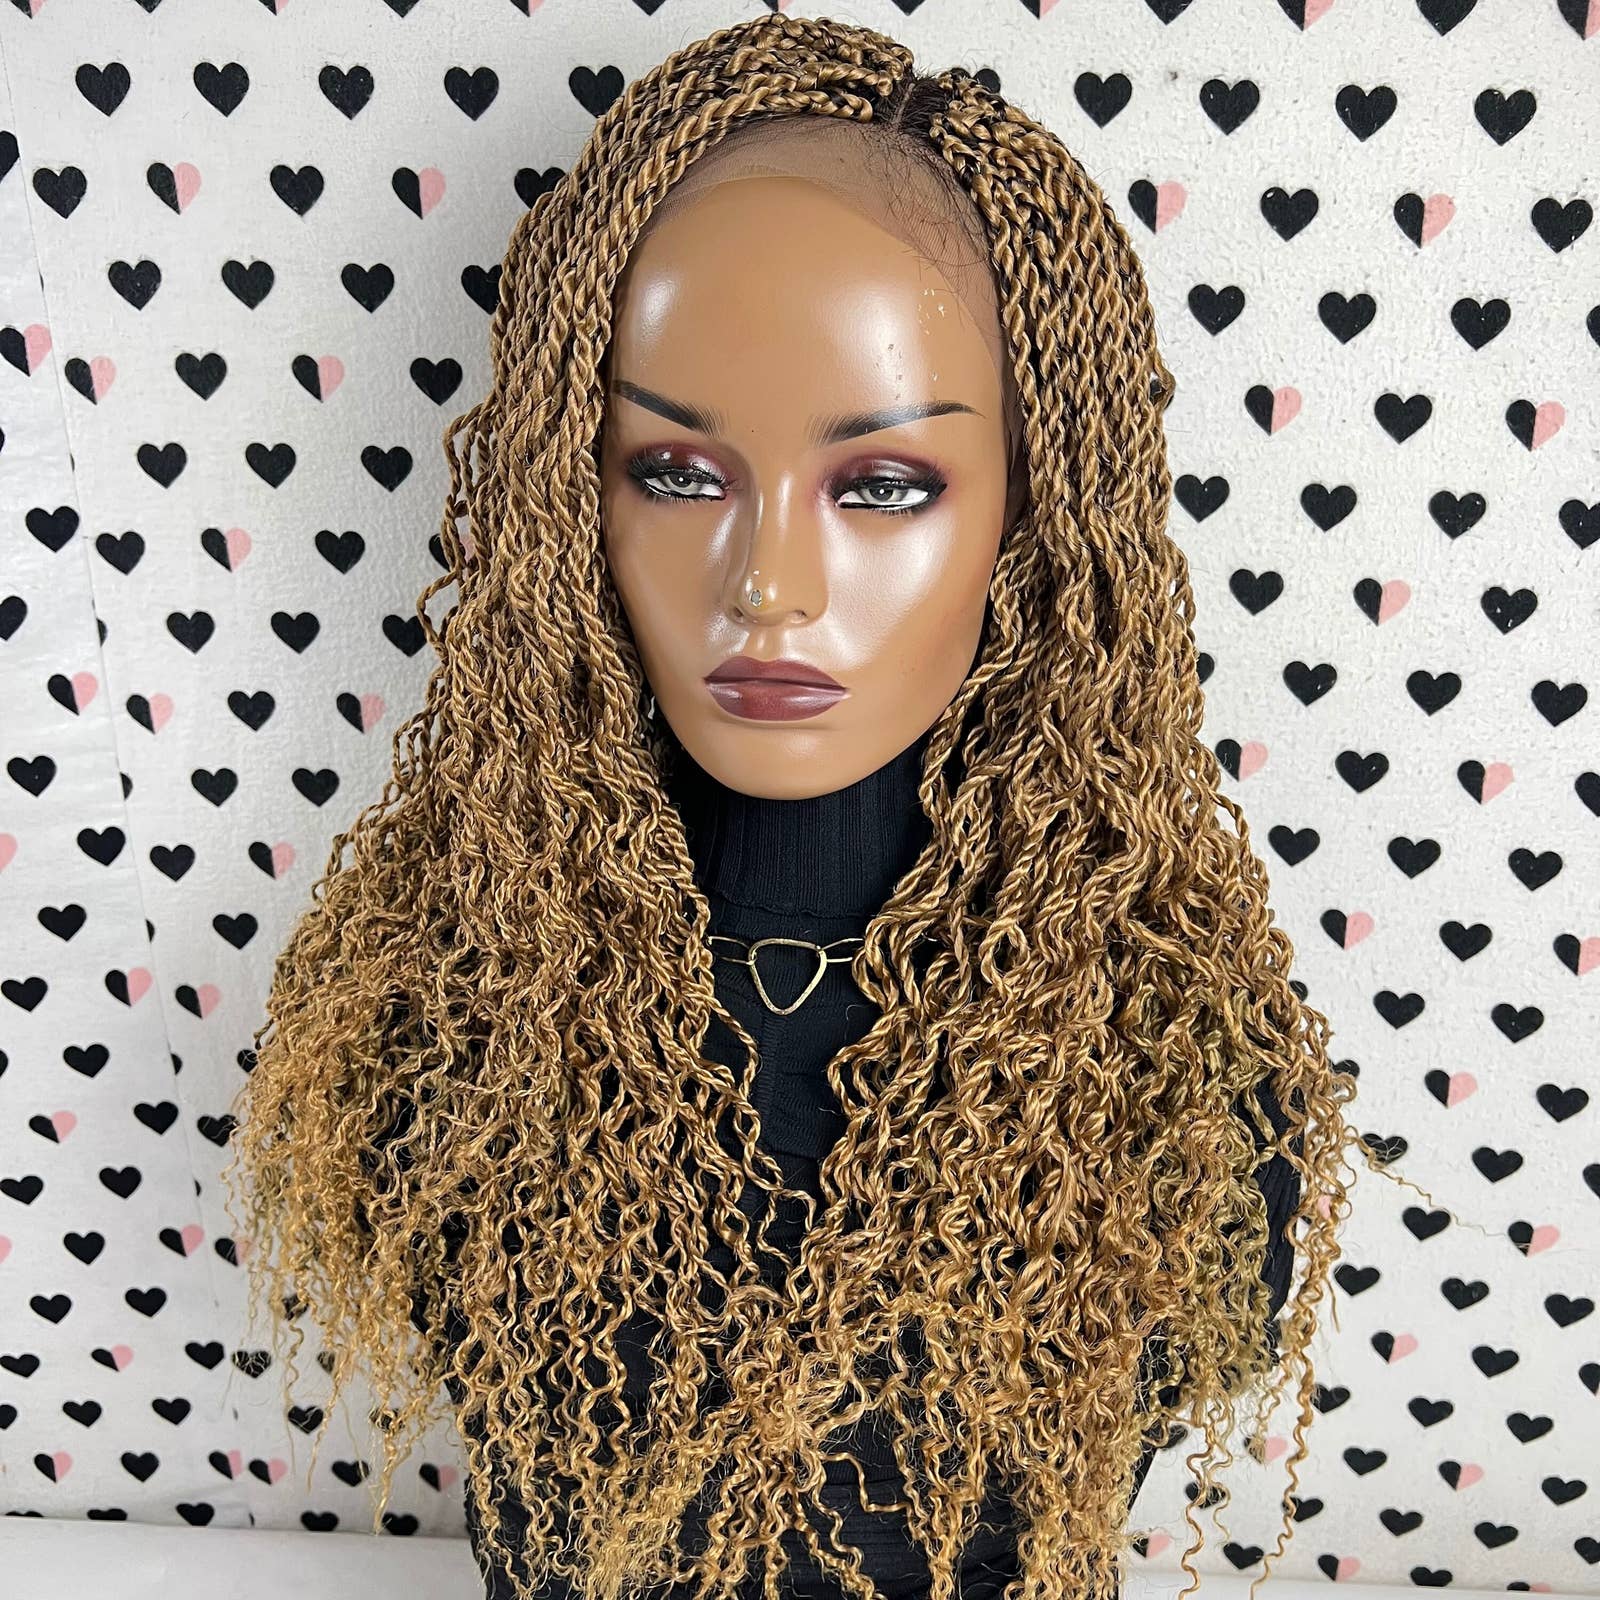 Short Curl Braid Lace Closure Handmade Box Braids Braided Lace Front Wig With  Curly Ends Color 30 -  Canada